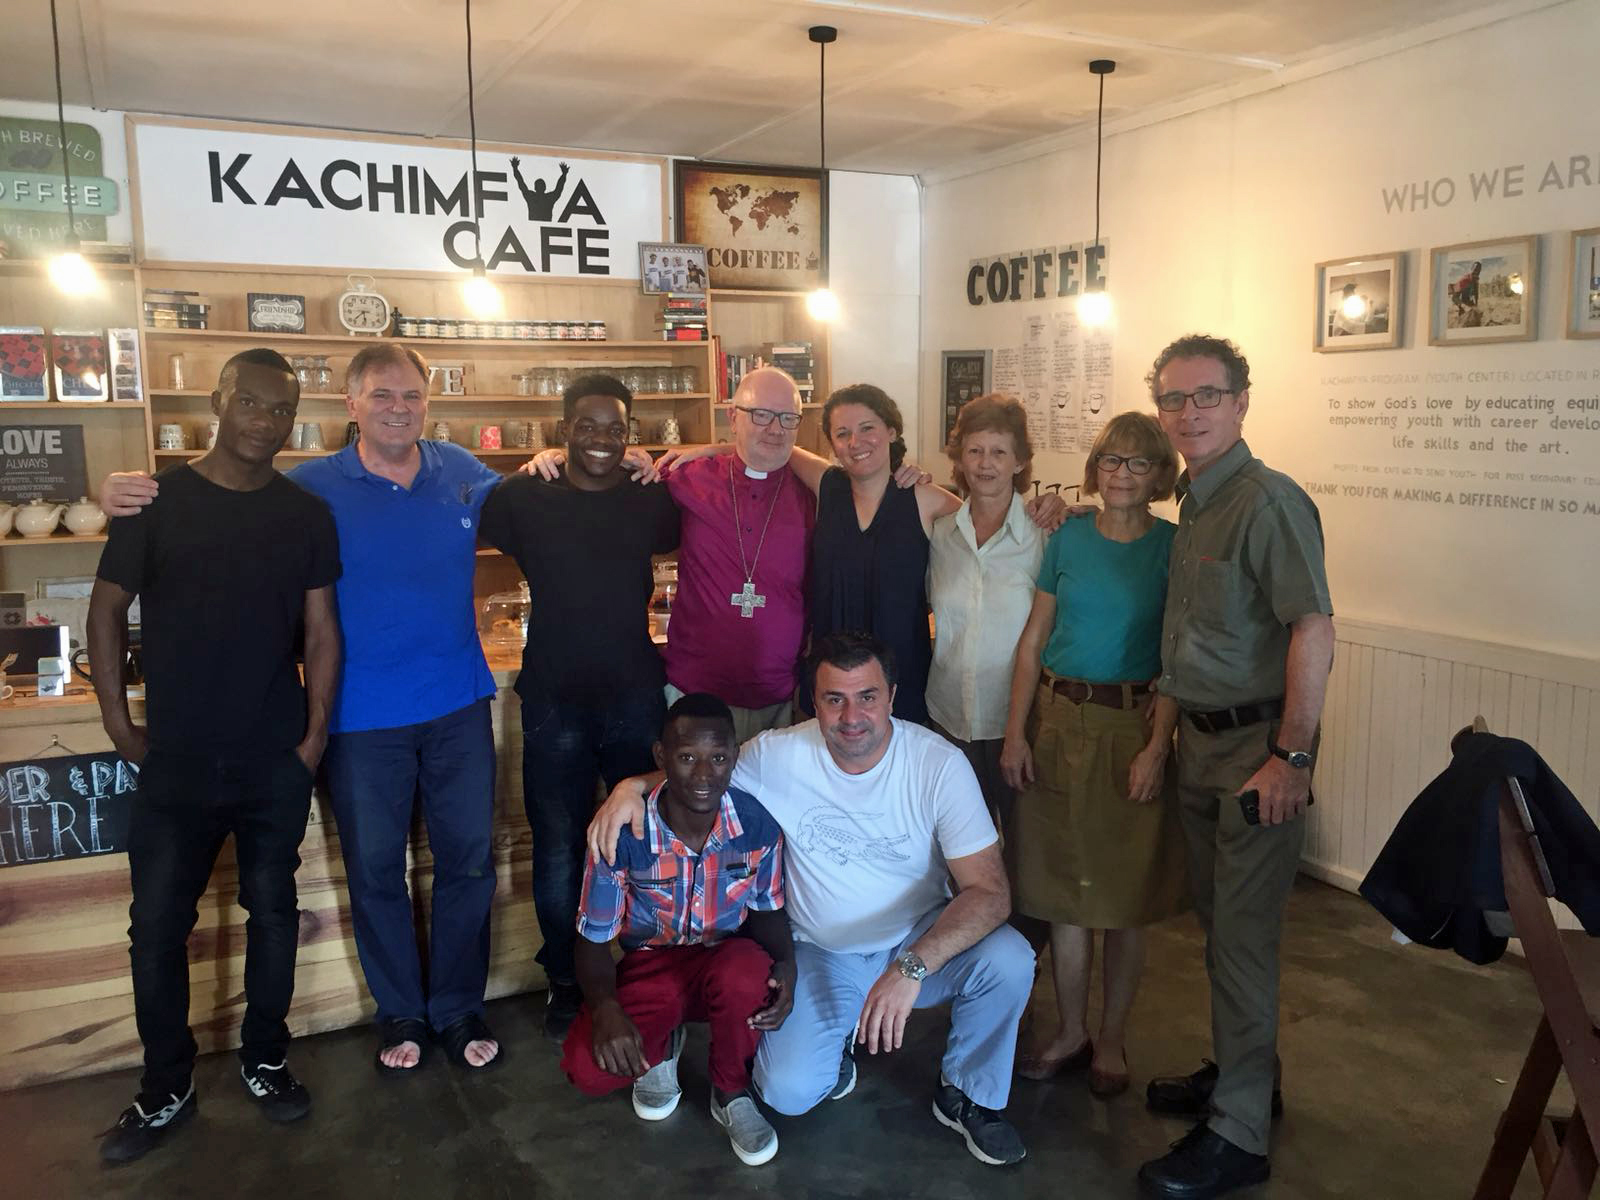 Archbishop Clarke with staff and friends of Kachimfwa after he blessed their work and their premises. Photo (c) CMS Ireland